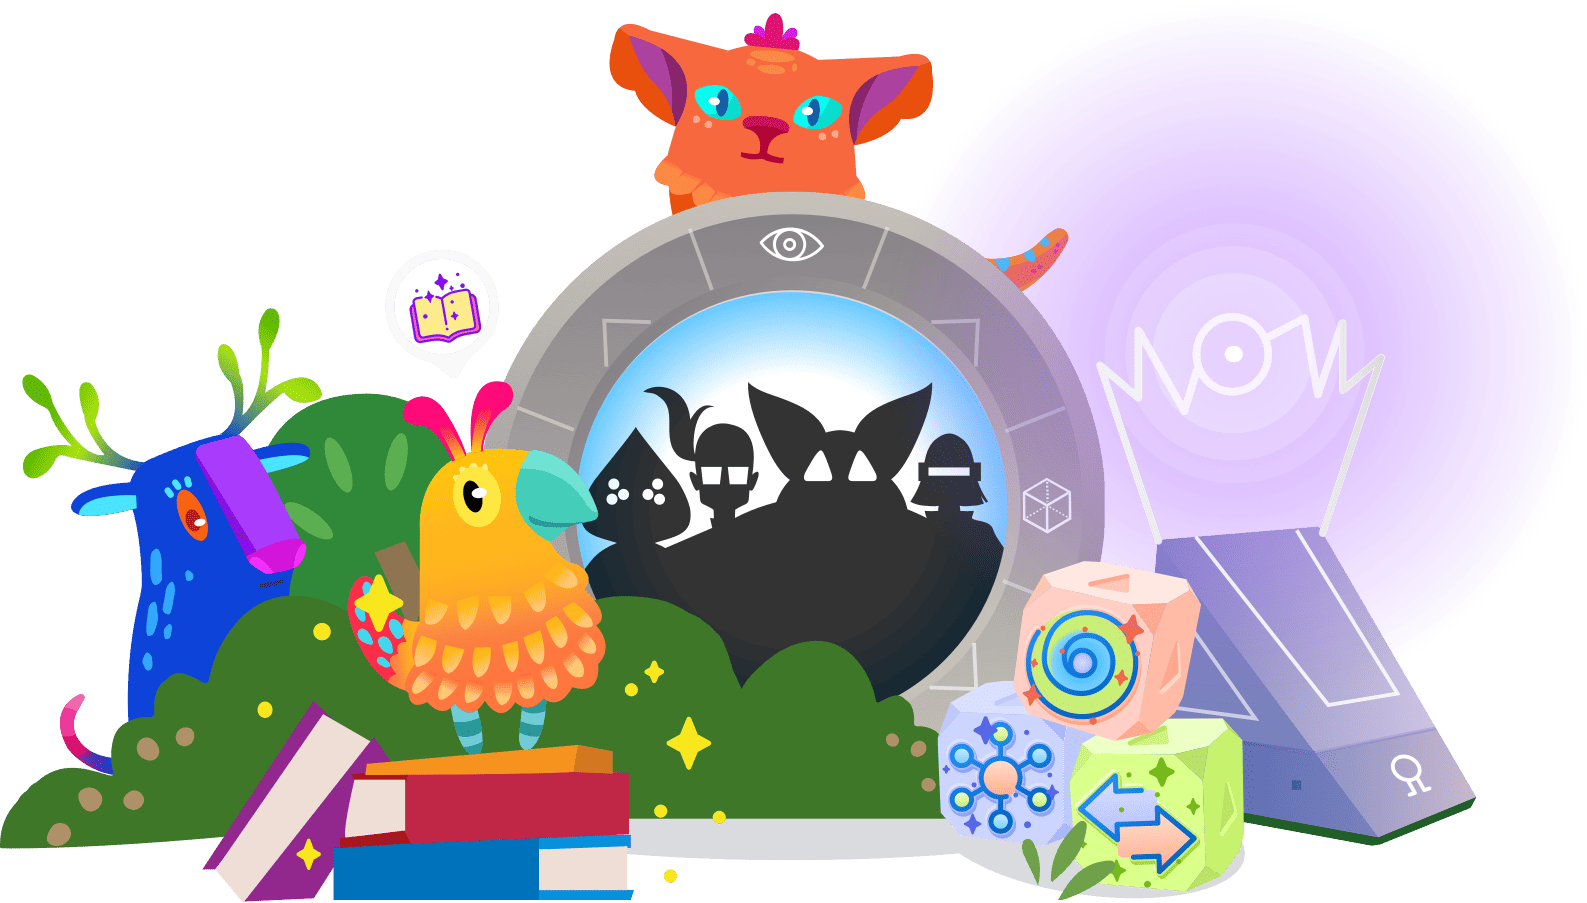 Colorful illustration of whimsical creatures around a crystal ball displaying a futuristic city, accompanied by books and geometric shapes.